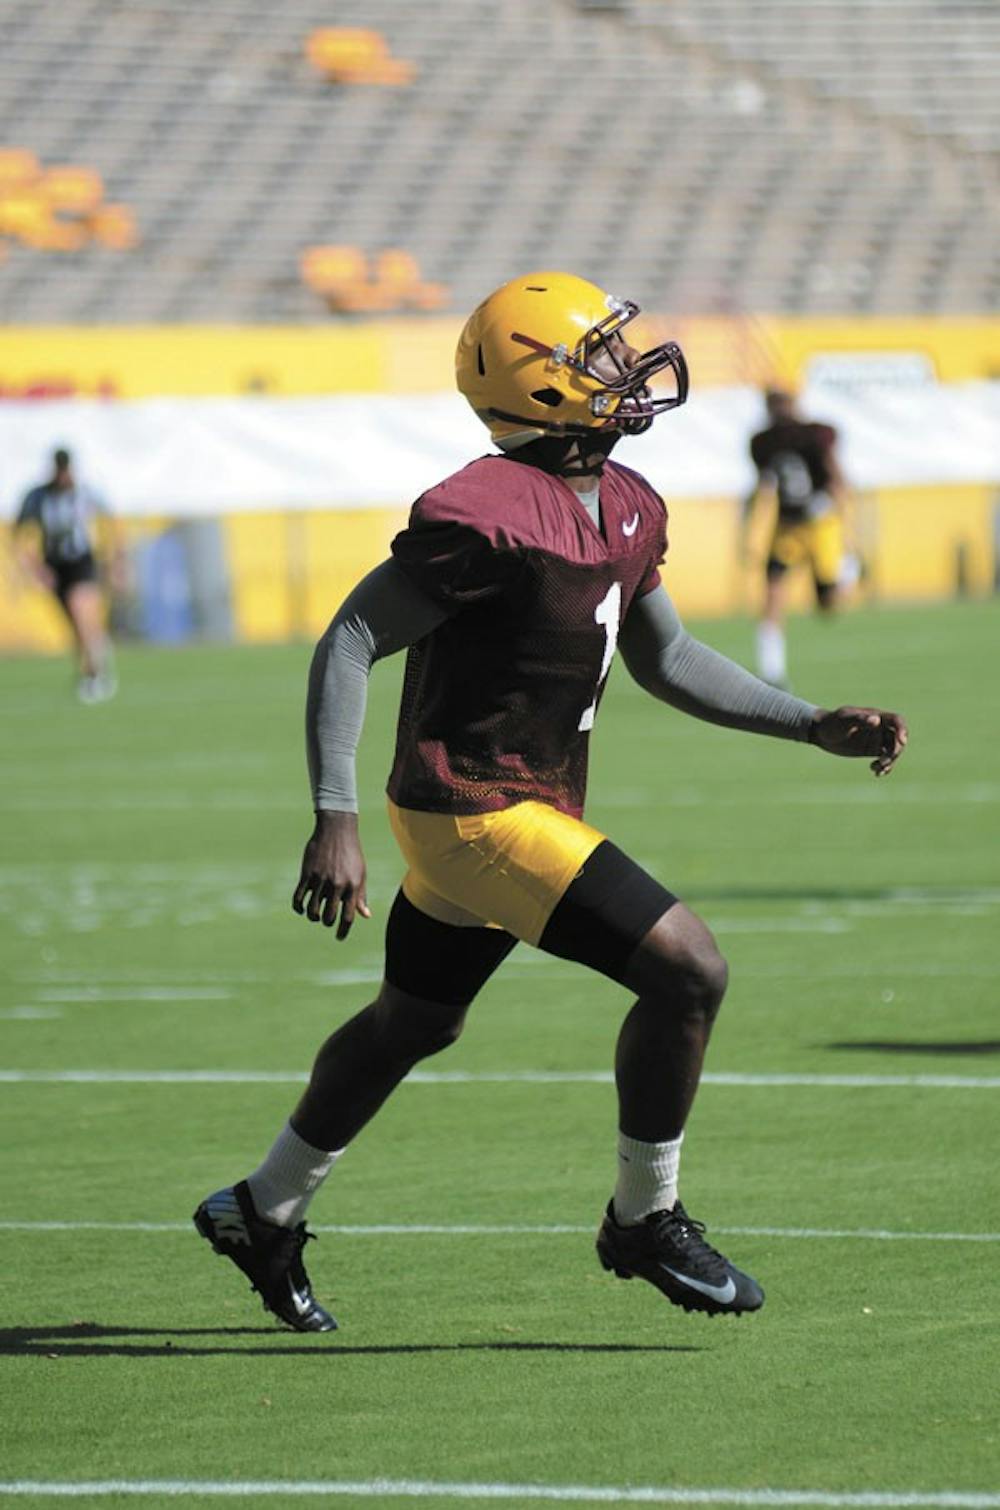 Junior running back Marion Grice tracks after a ball during the Sun Devils’ practice Tuesday at Sun Devil Stadium. (Photo by Aaron Lavinsky)
